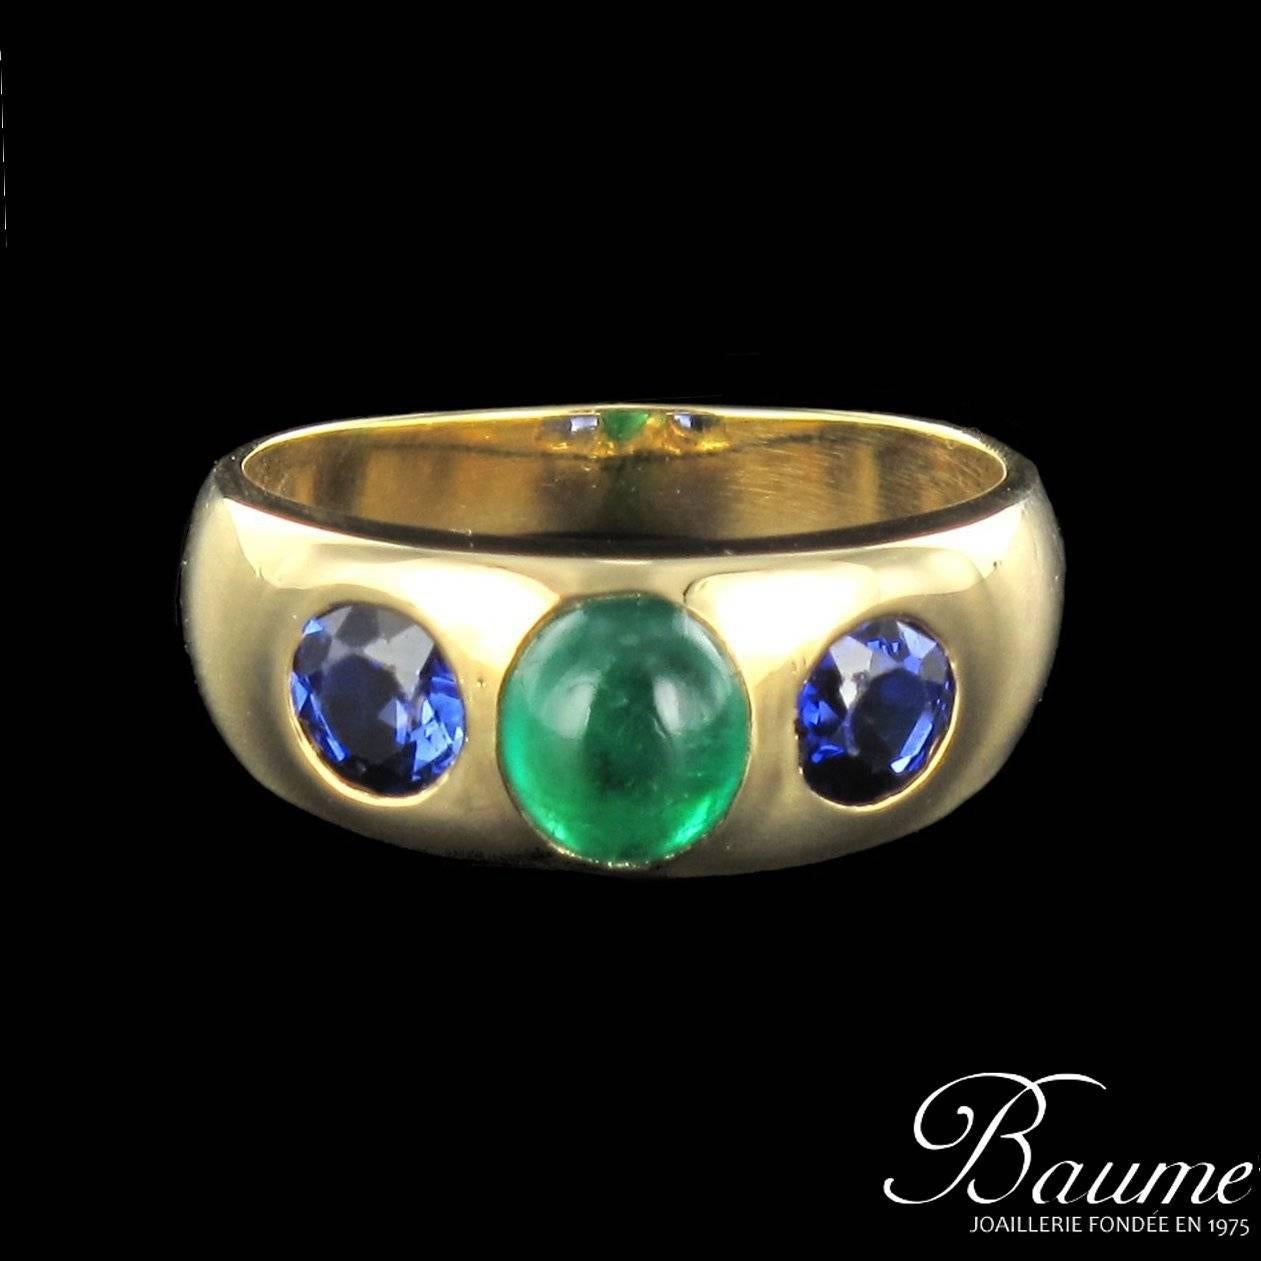 18 carat ellow gold ring, eagle head hallmark.

This rounded ring is set with a central emerald cabochon enhanced by round blue sapphires at each side. 
Total weight of the emerald: 1.44 carat approximately 
Total weight of sapphires: about 1.20